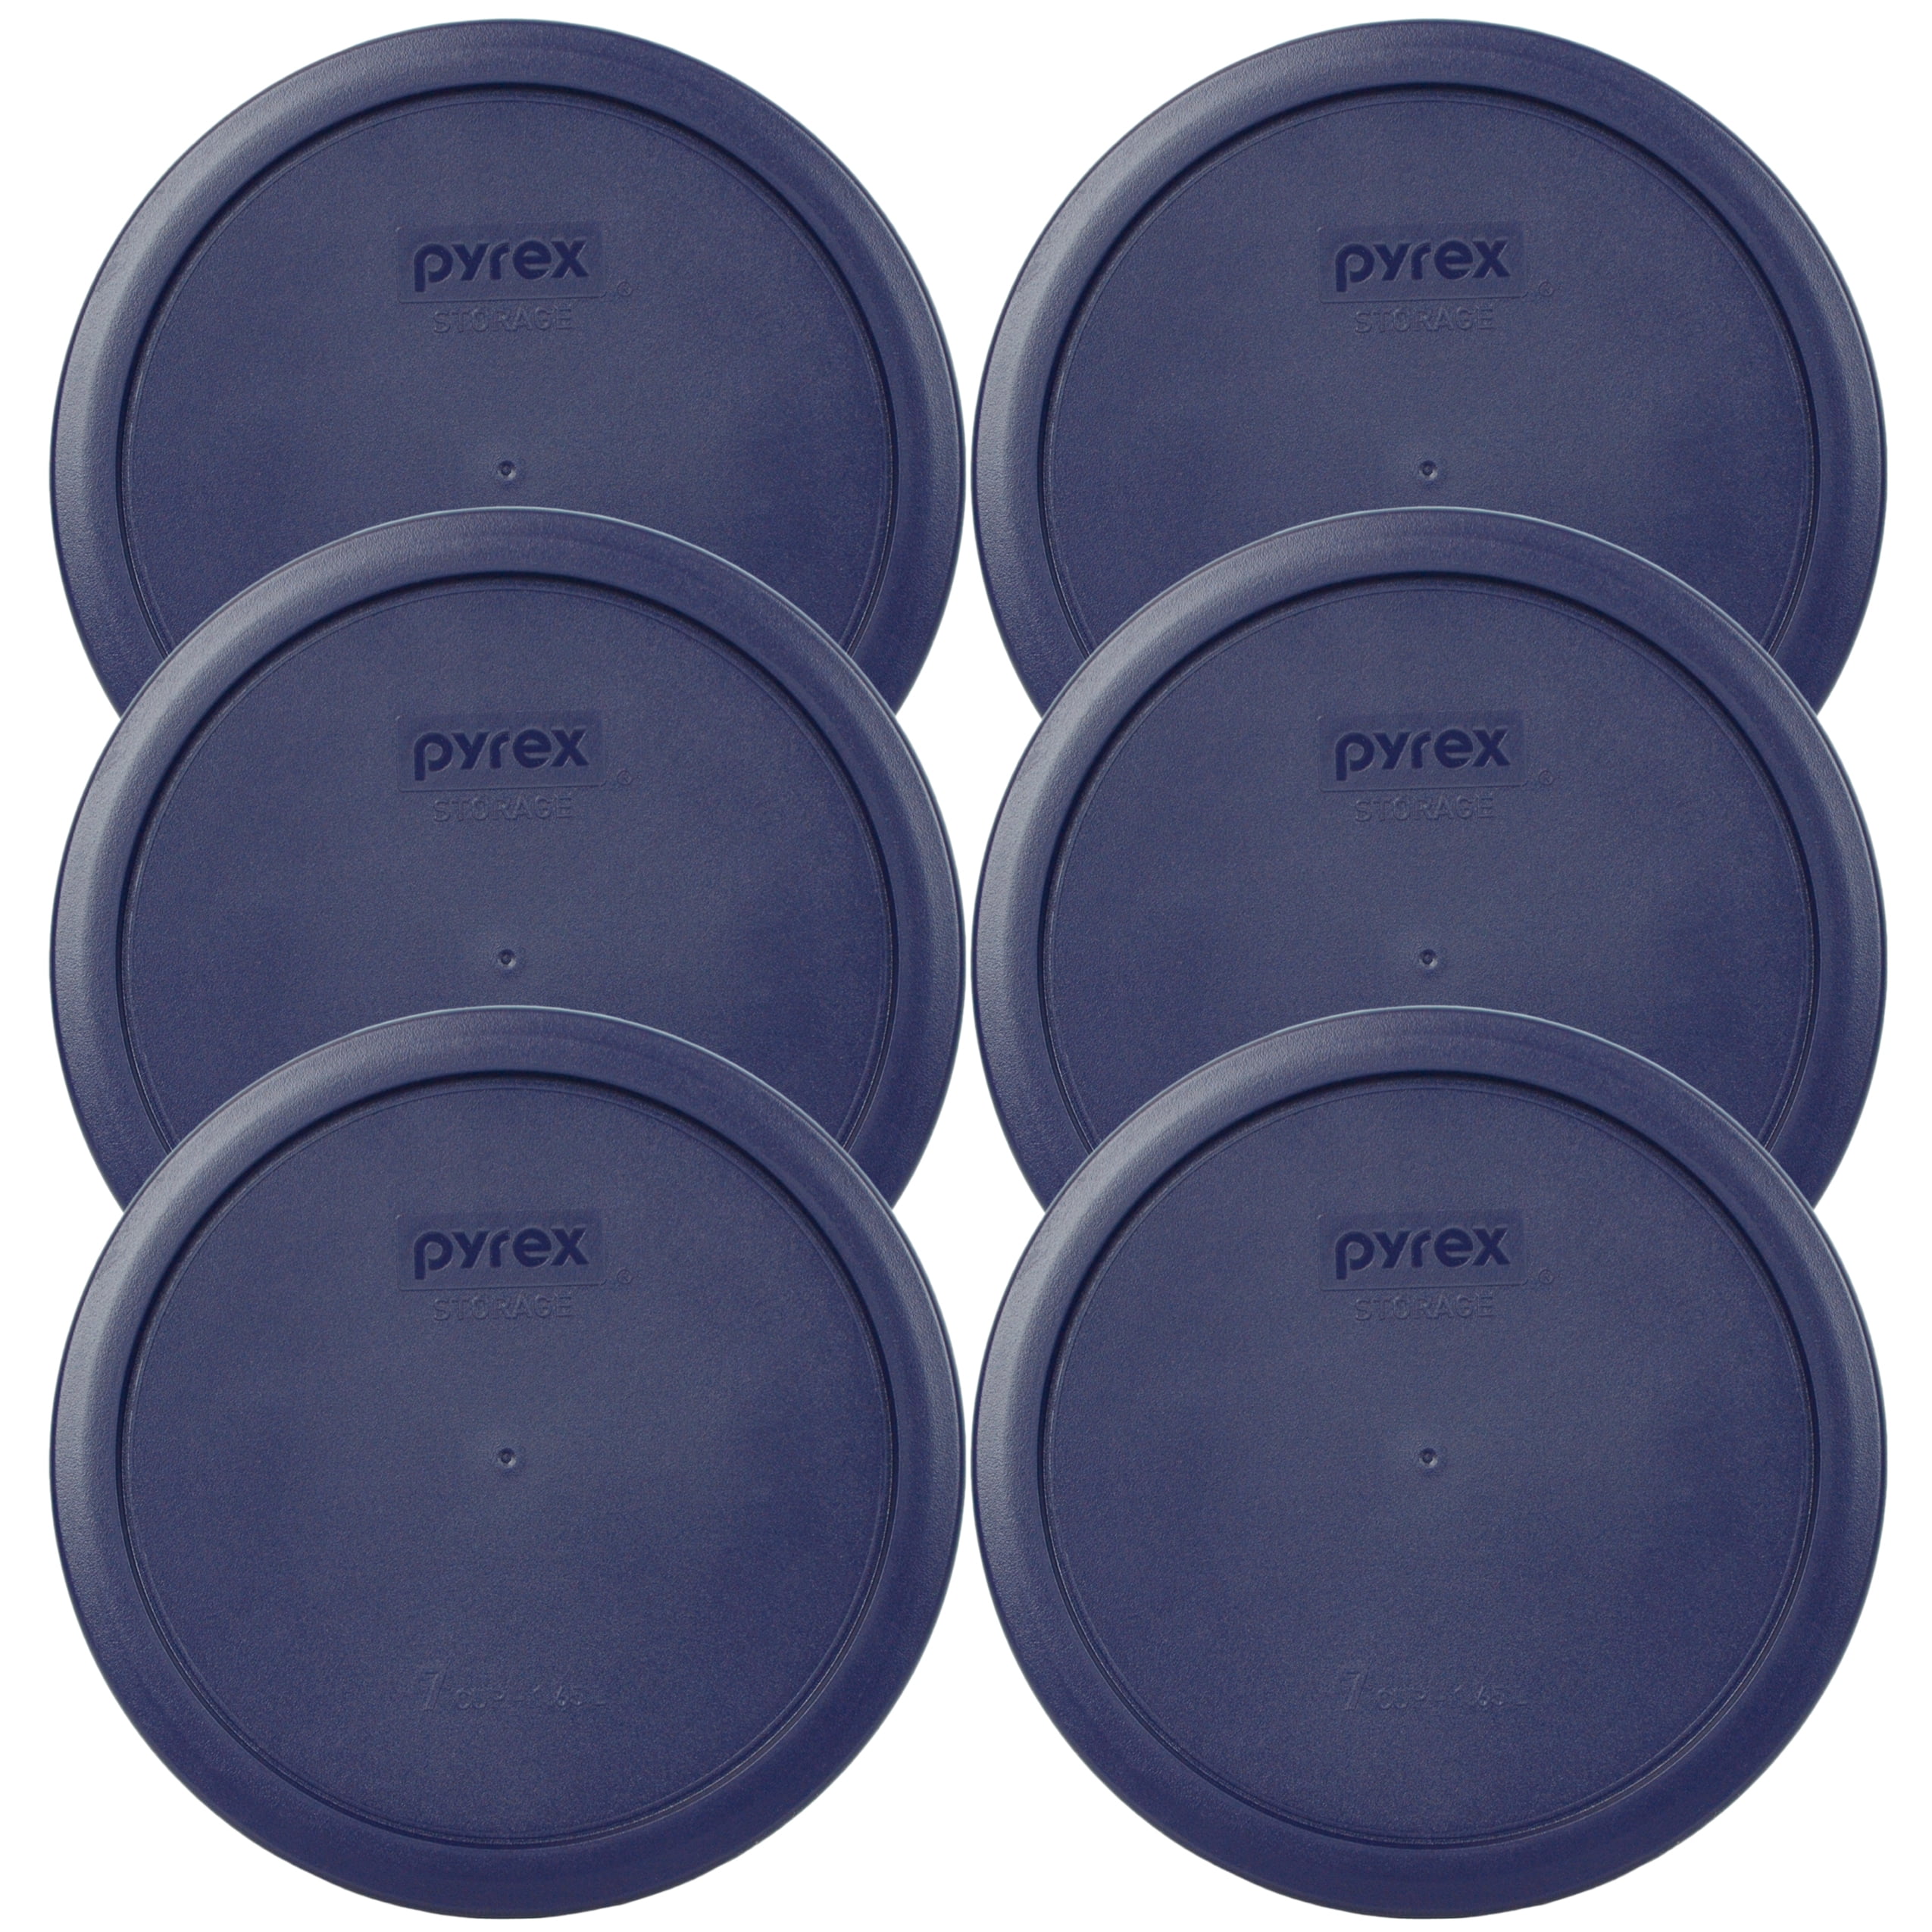 Pyrex 7402-PC Blue 6/7 Cup Round Plastic storage Lids 12PK for Glass Bowl New 